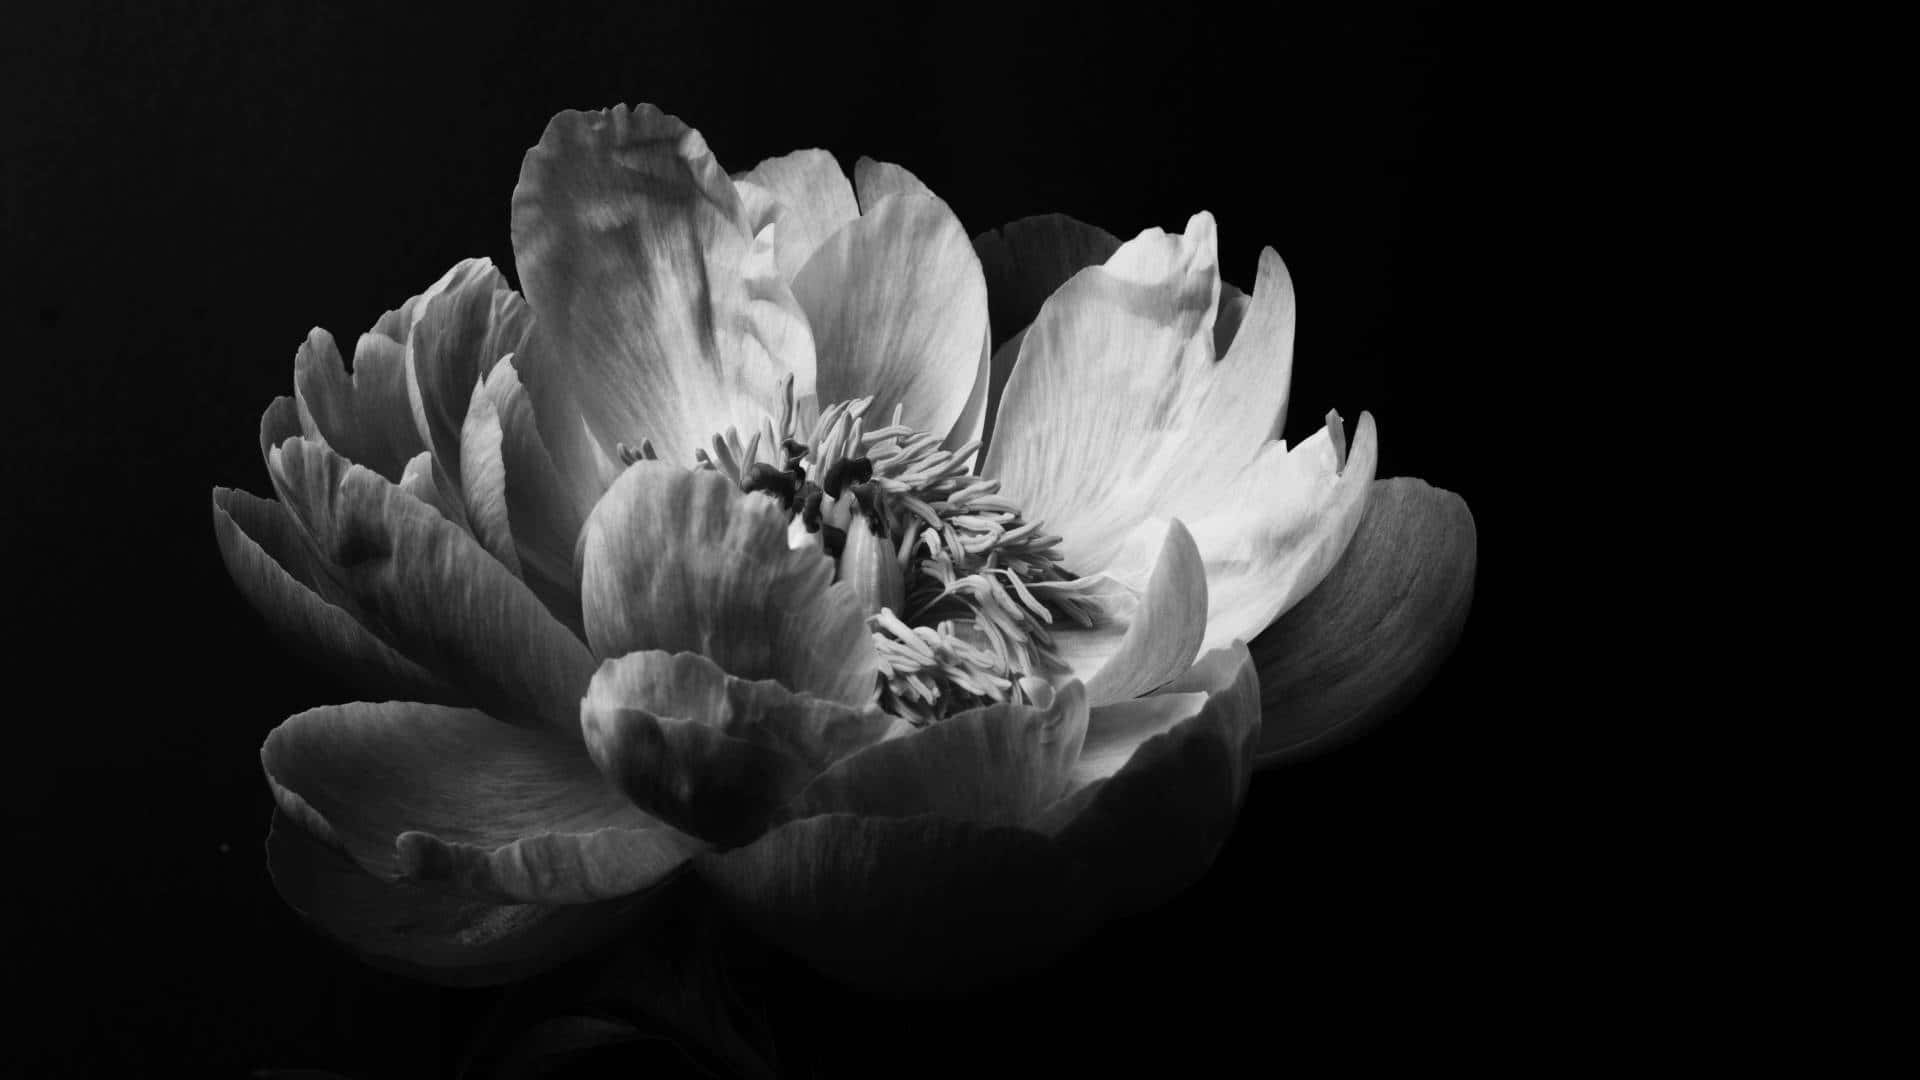 tumblr wallpapers black and white flowers